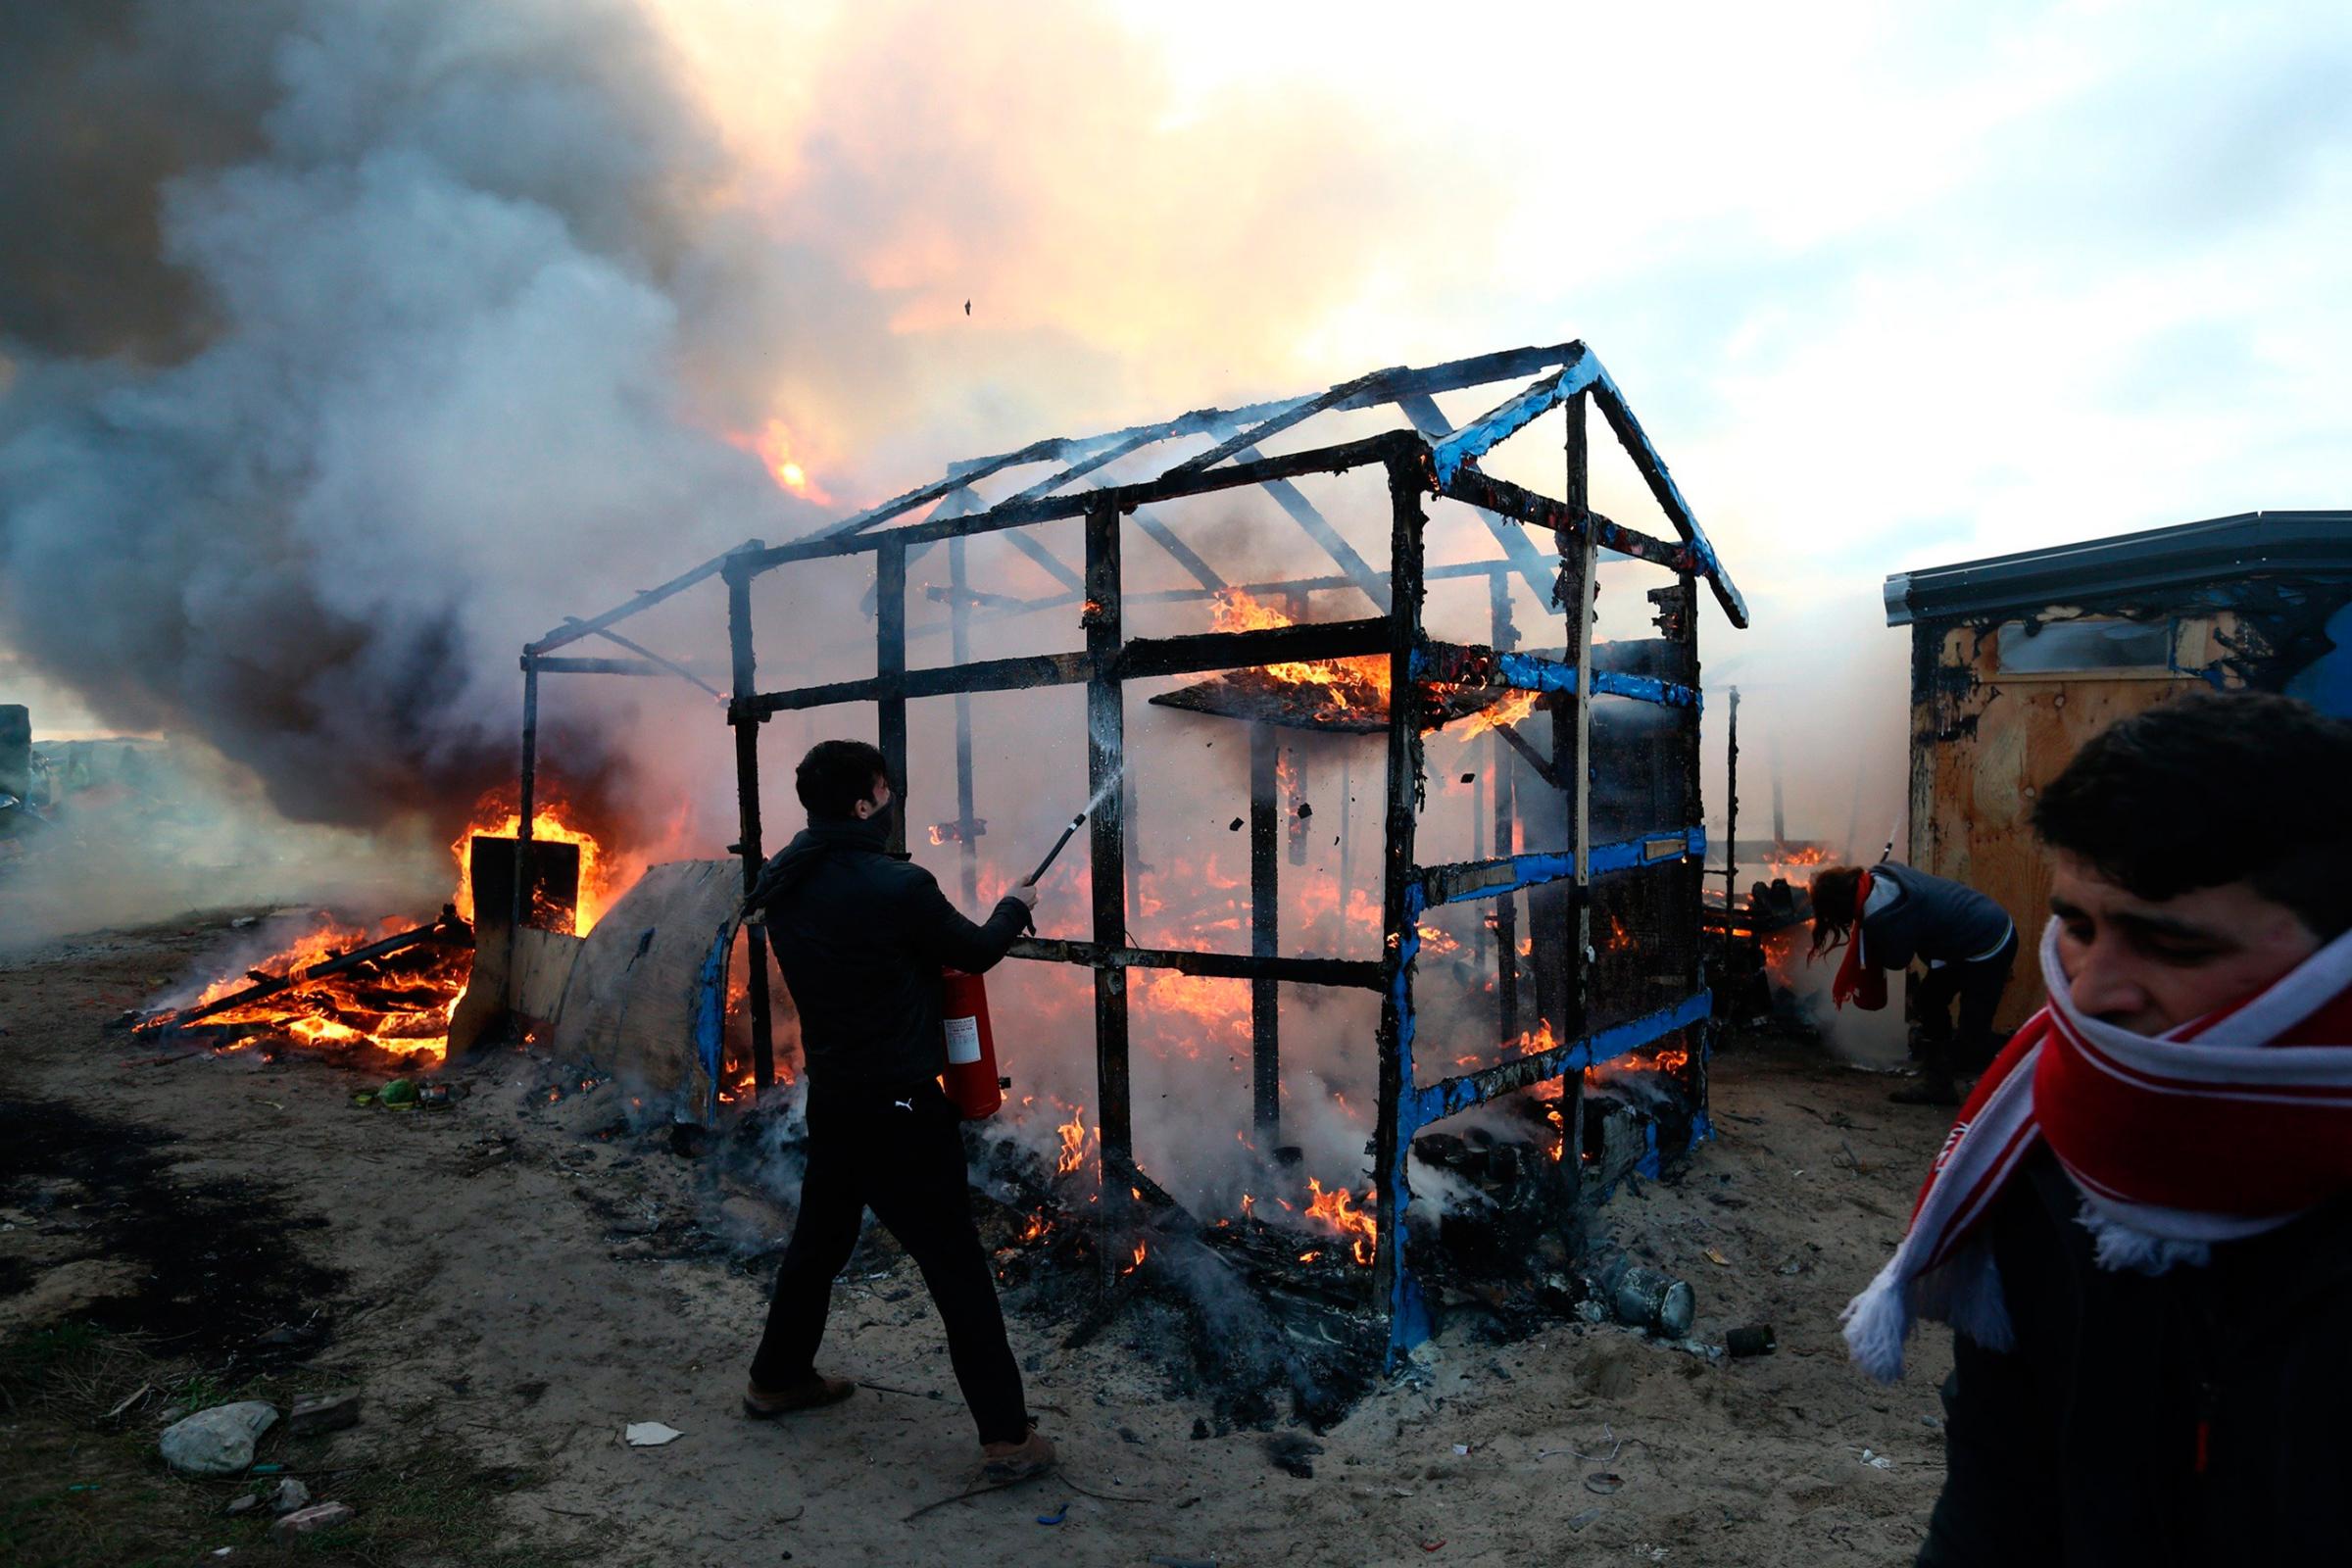 A migrant attempts to extinguish a fire as a shelter burns as police officers clear part of the "Jungle" migrant camp in Calais, France, Feb. 29, 2016.